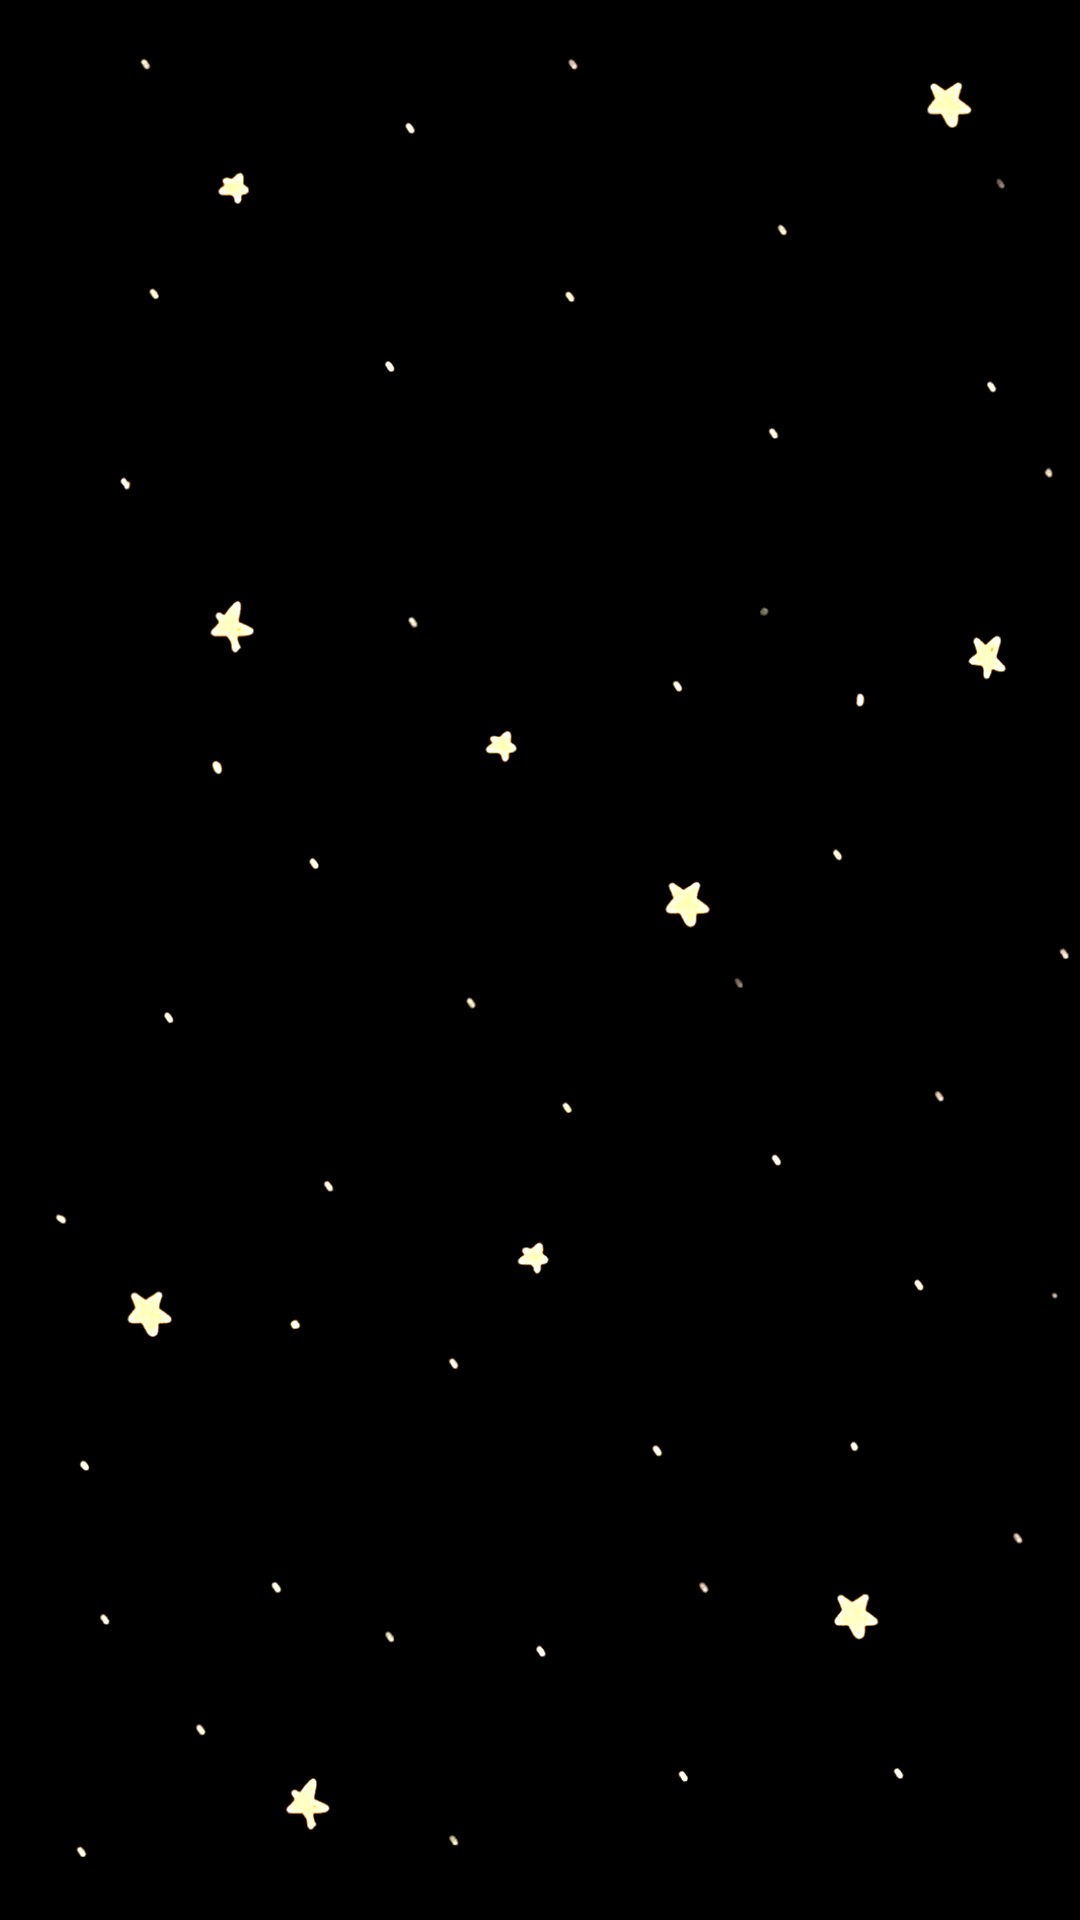 Wallpaper Stars Aesthetic Android With high-resolution 1080X1920 pixel. You can use this wallpaper for your Android backgrounds, Tablet, Samsung Screensavers, Mobile Phone Lock Screen and another Smartphones device